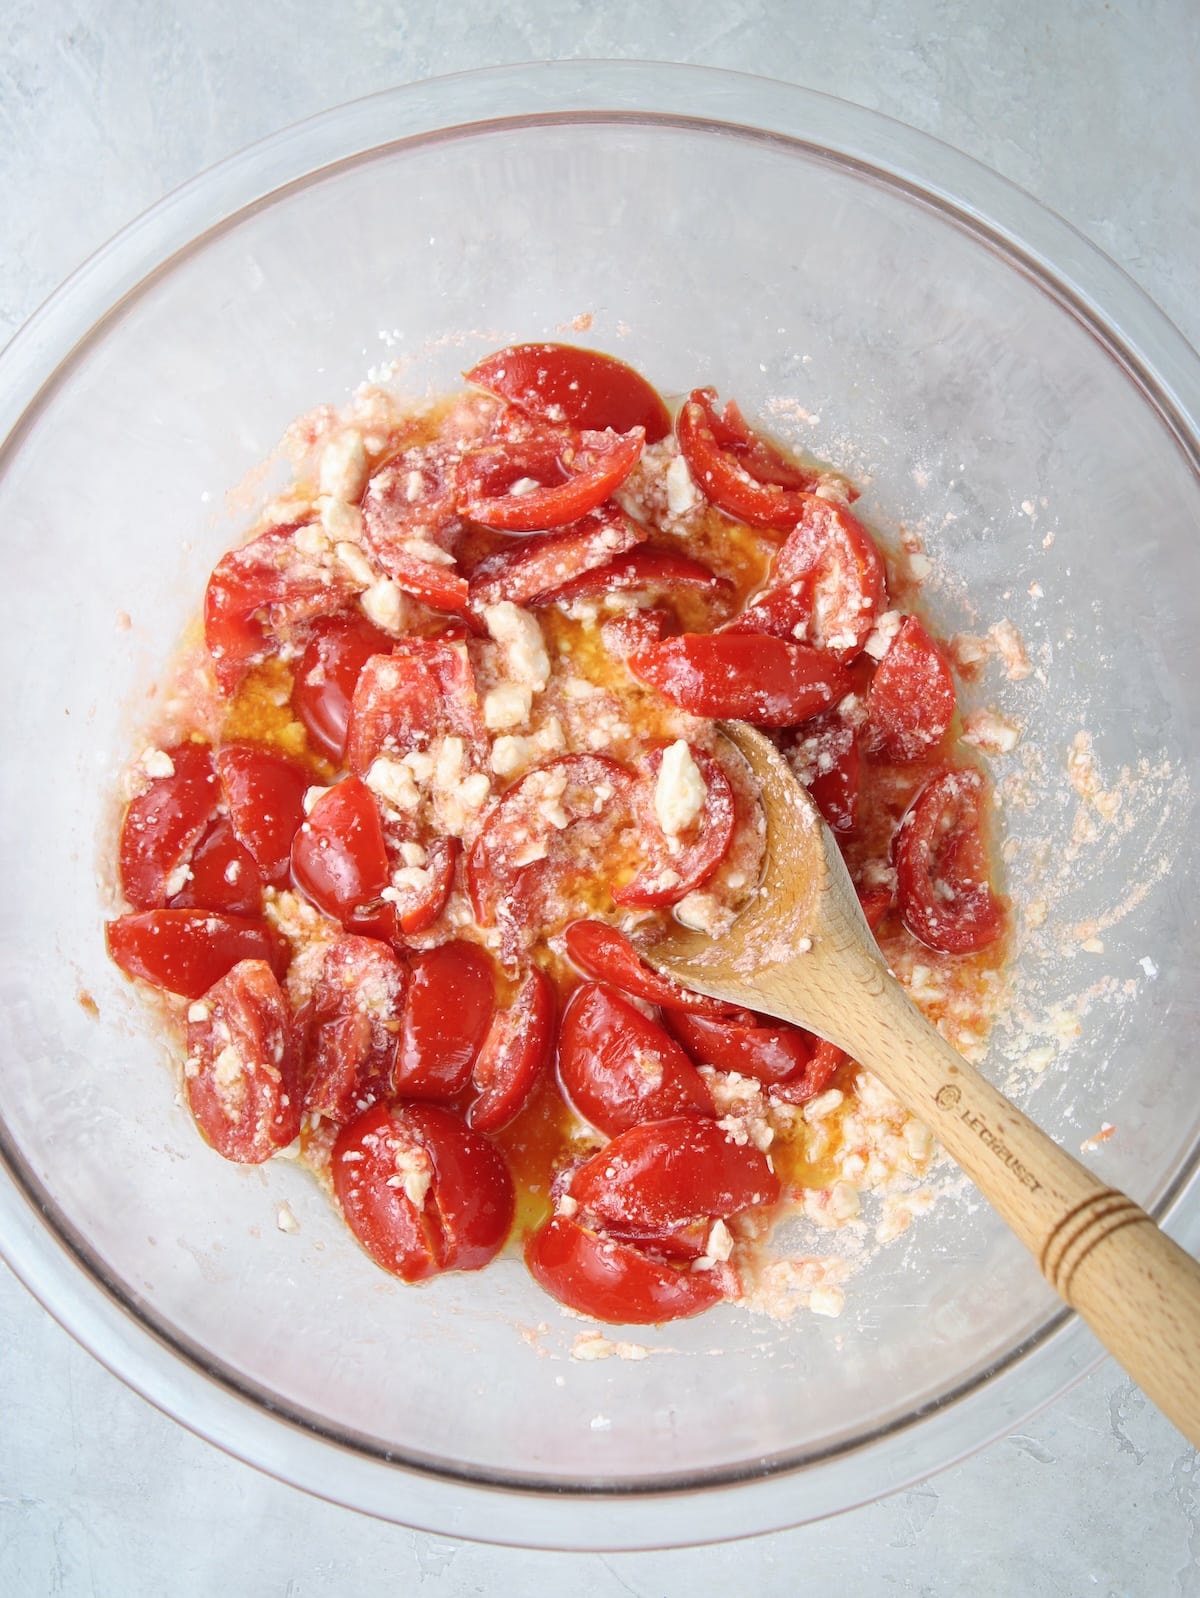 Cut up tomatoes sprinkled with salt and crumbled feta in a large bowl.